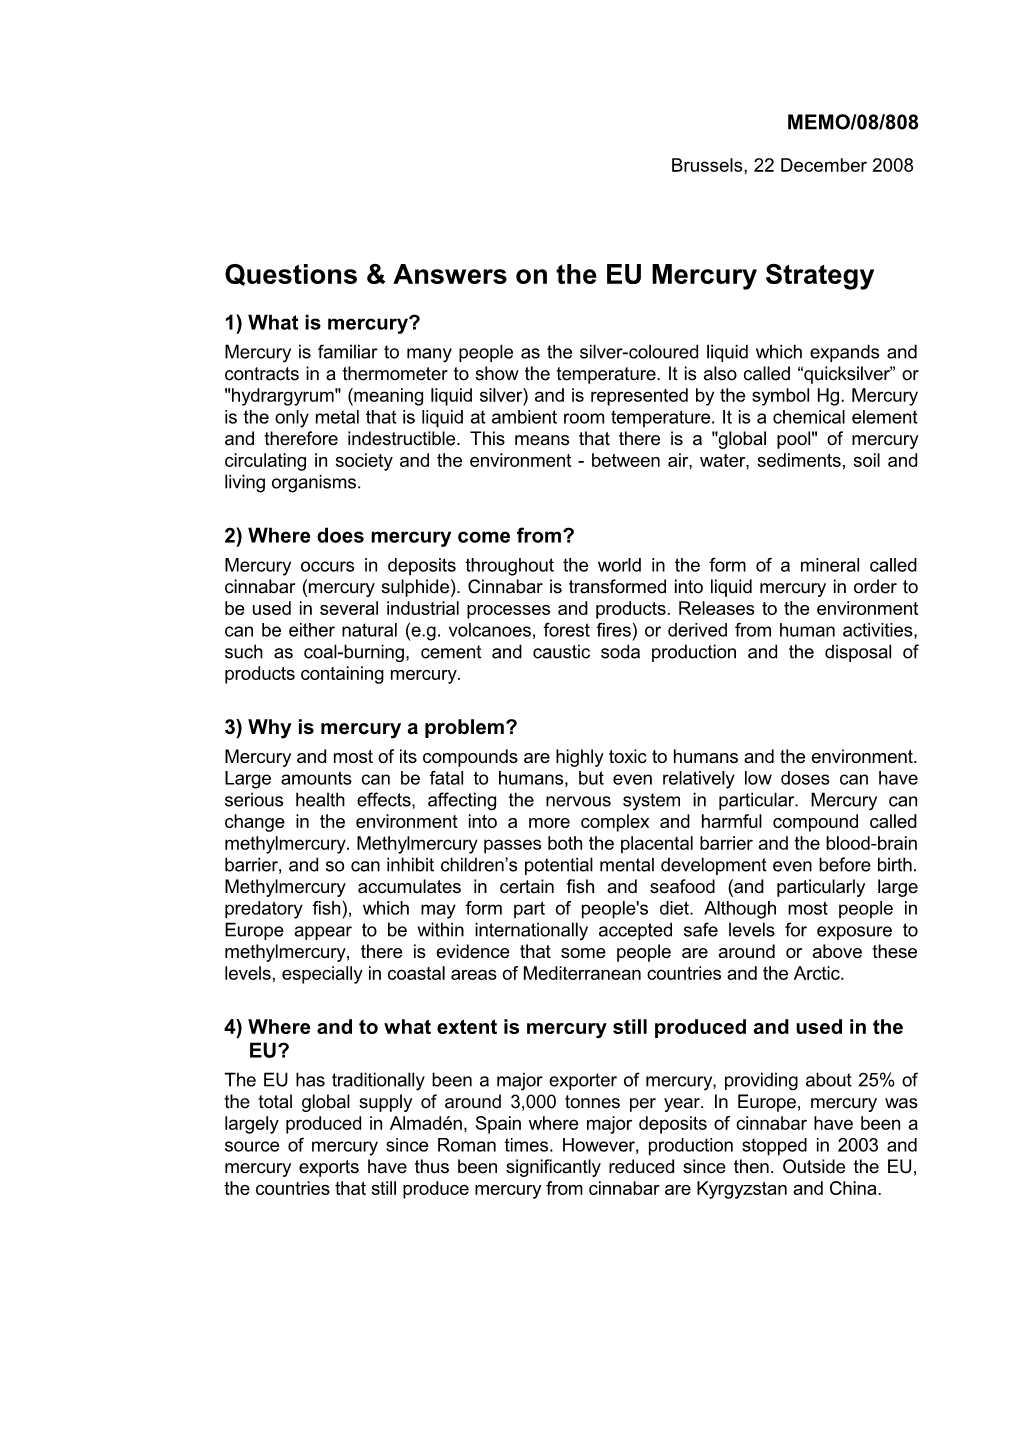 Questions & Answers on the EU Mercury Strategy